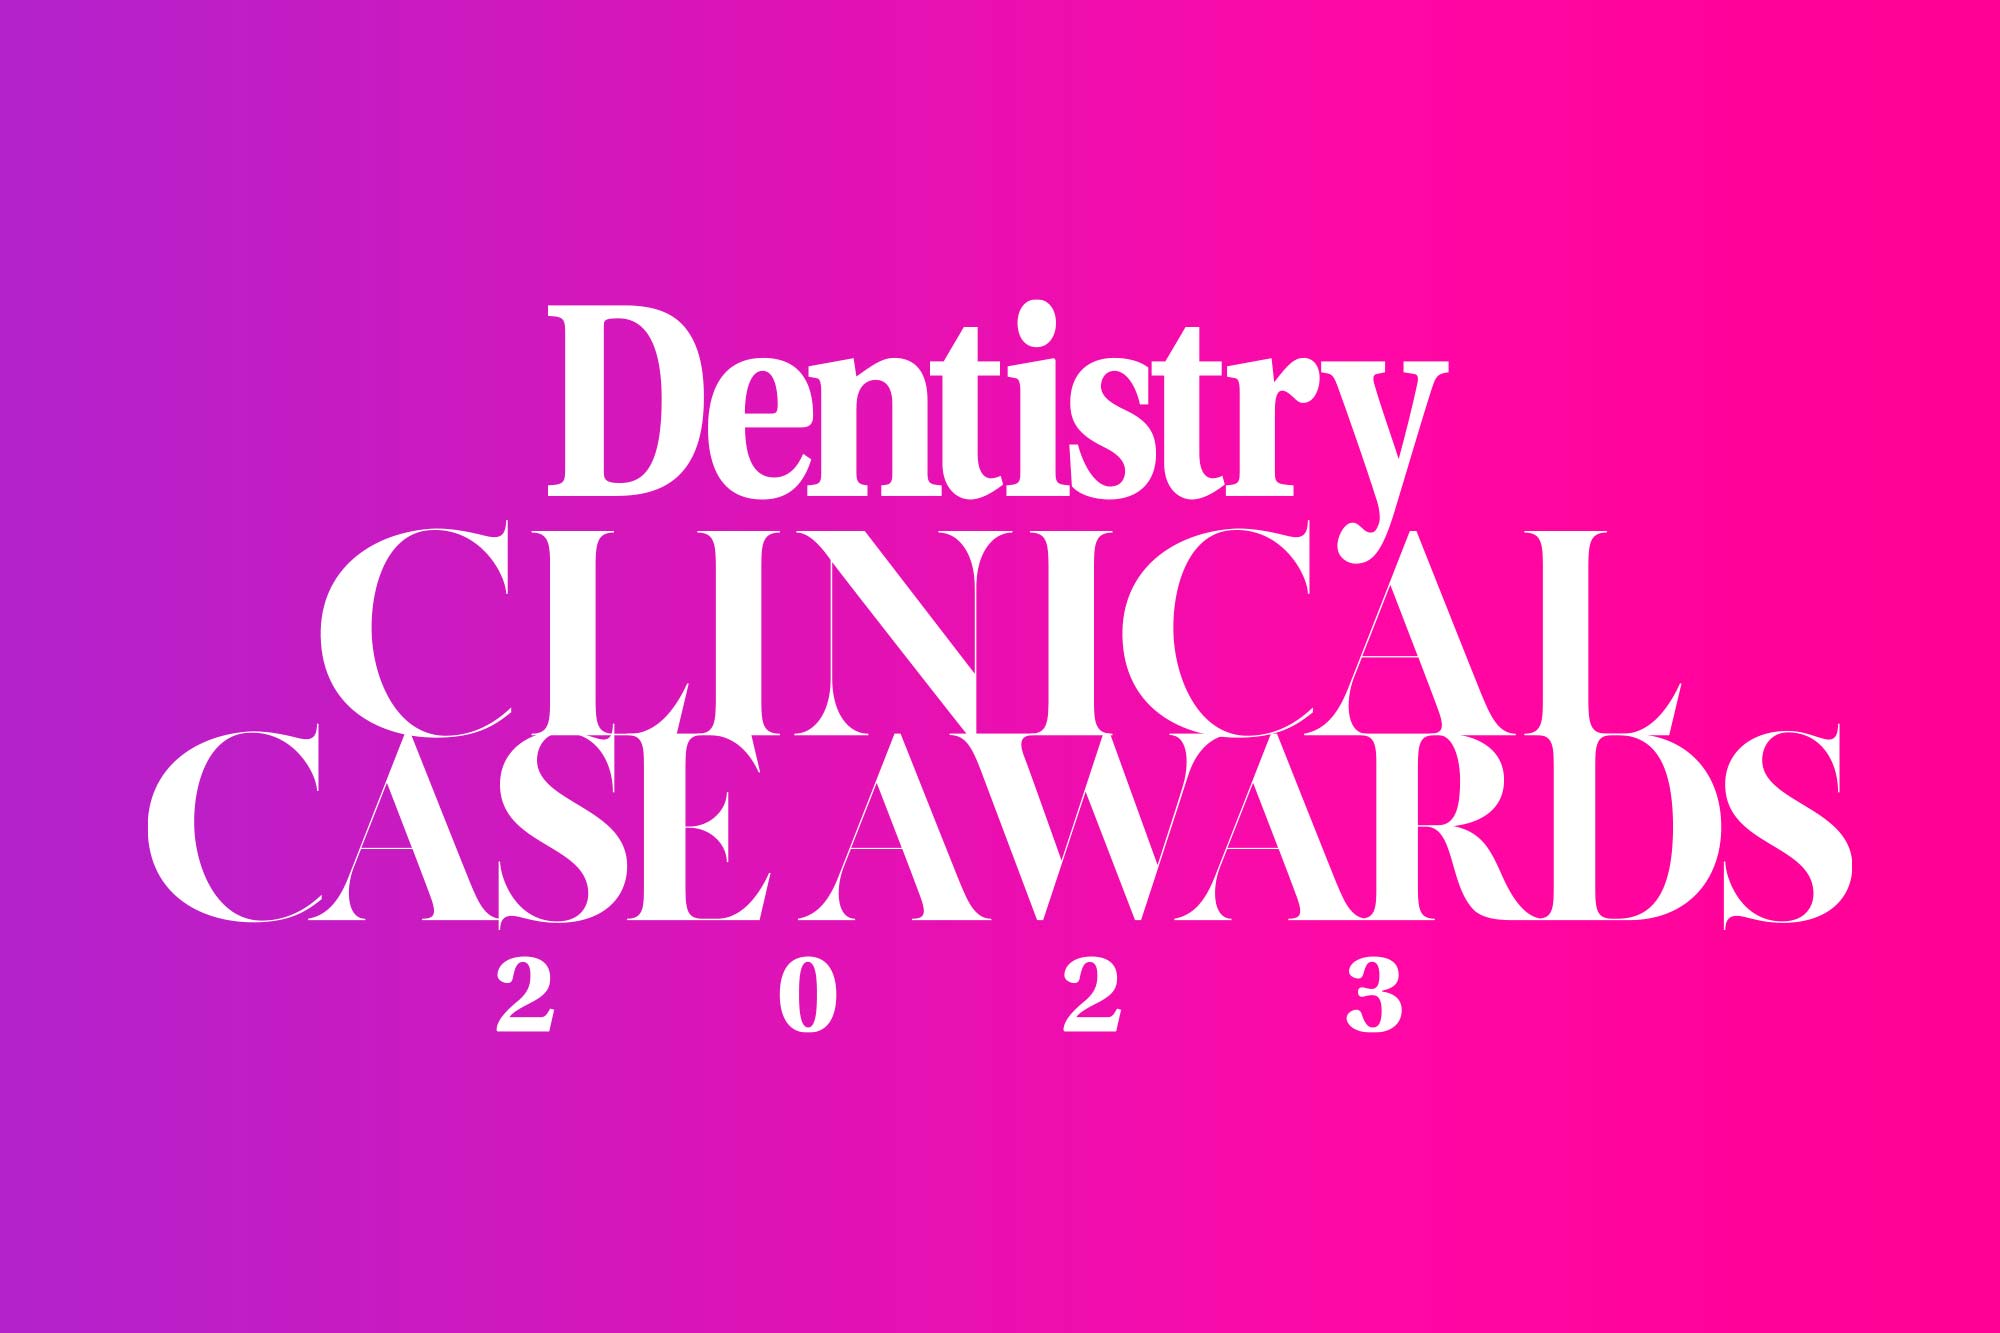 This year’s Dentistry Clinical Case Awards are open for entry. Here’s everything you need to know about how to enter, including the full list of categories.